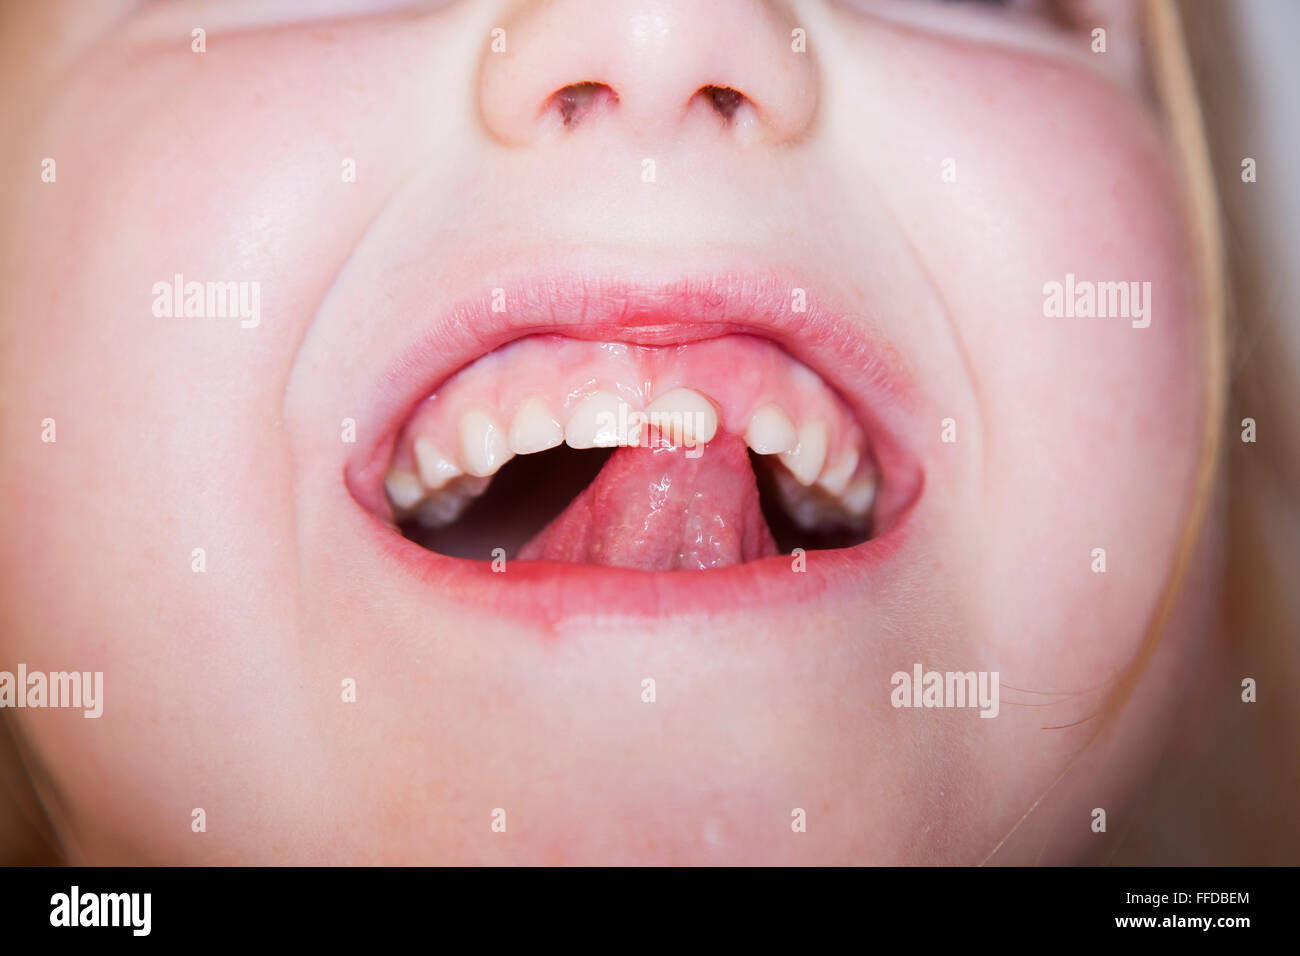 Child / five year old Child's loose front milk teeth / central incisor tooth which is about to fall out from the gum and mouth. Stock Photo